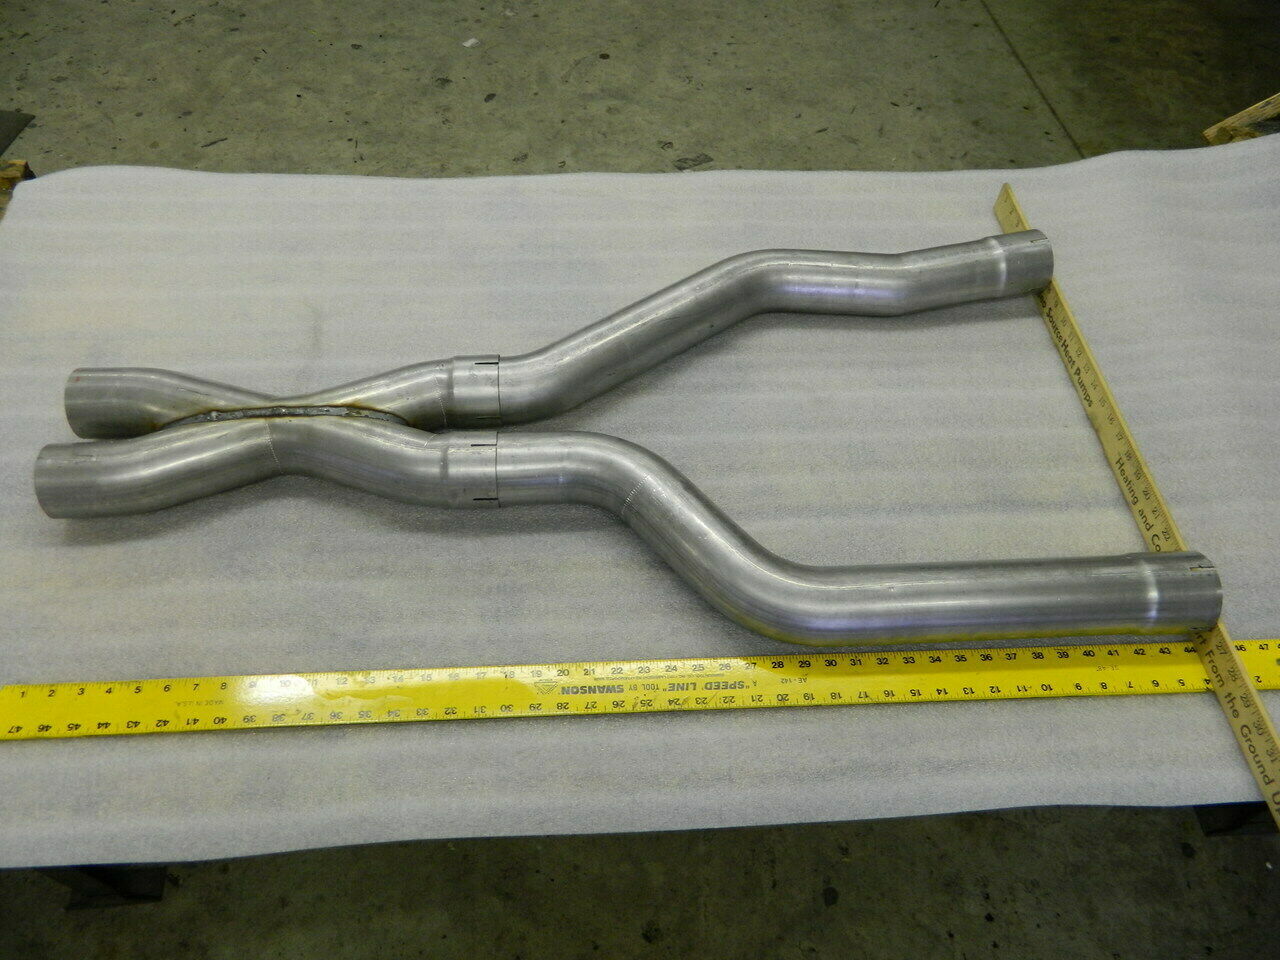 C4 Corvette exhaust header adapter tubes and x-pipe